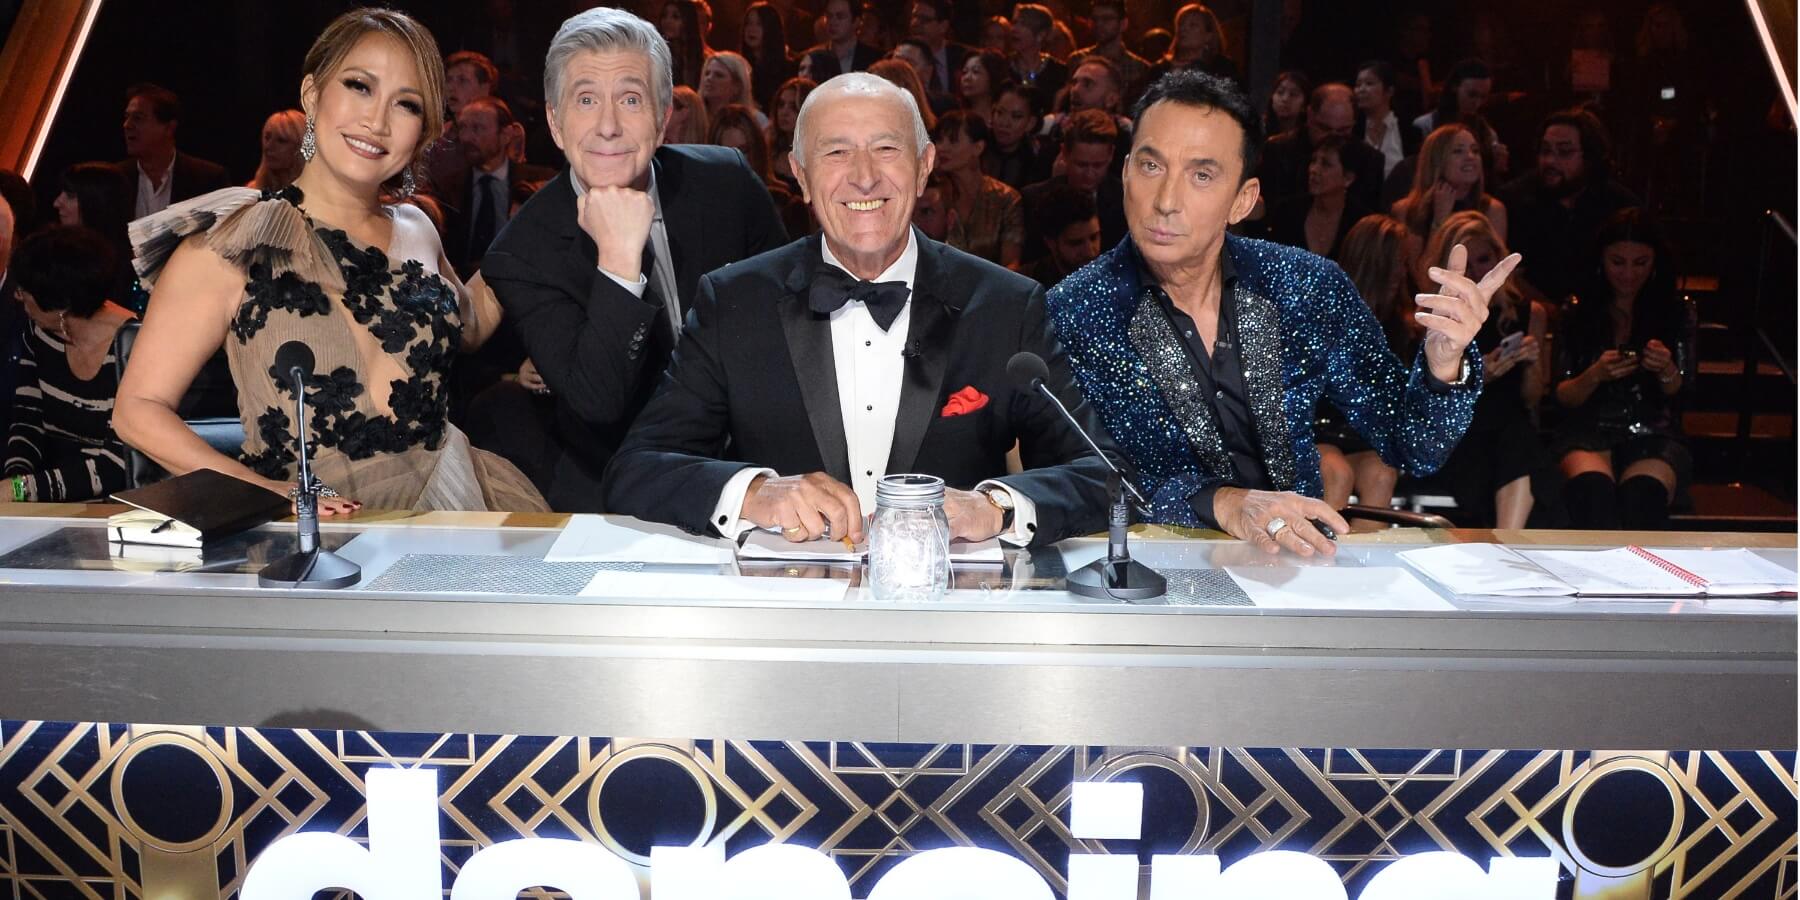 Dwts Tom Bergeron Reveals How He Screwed Producers Ahead Of Shocking 2020 Departure